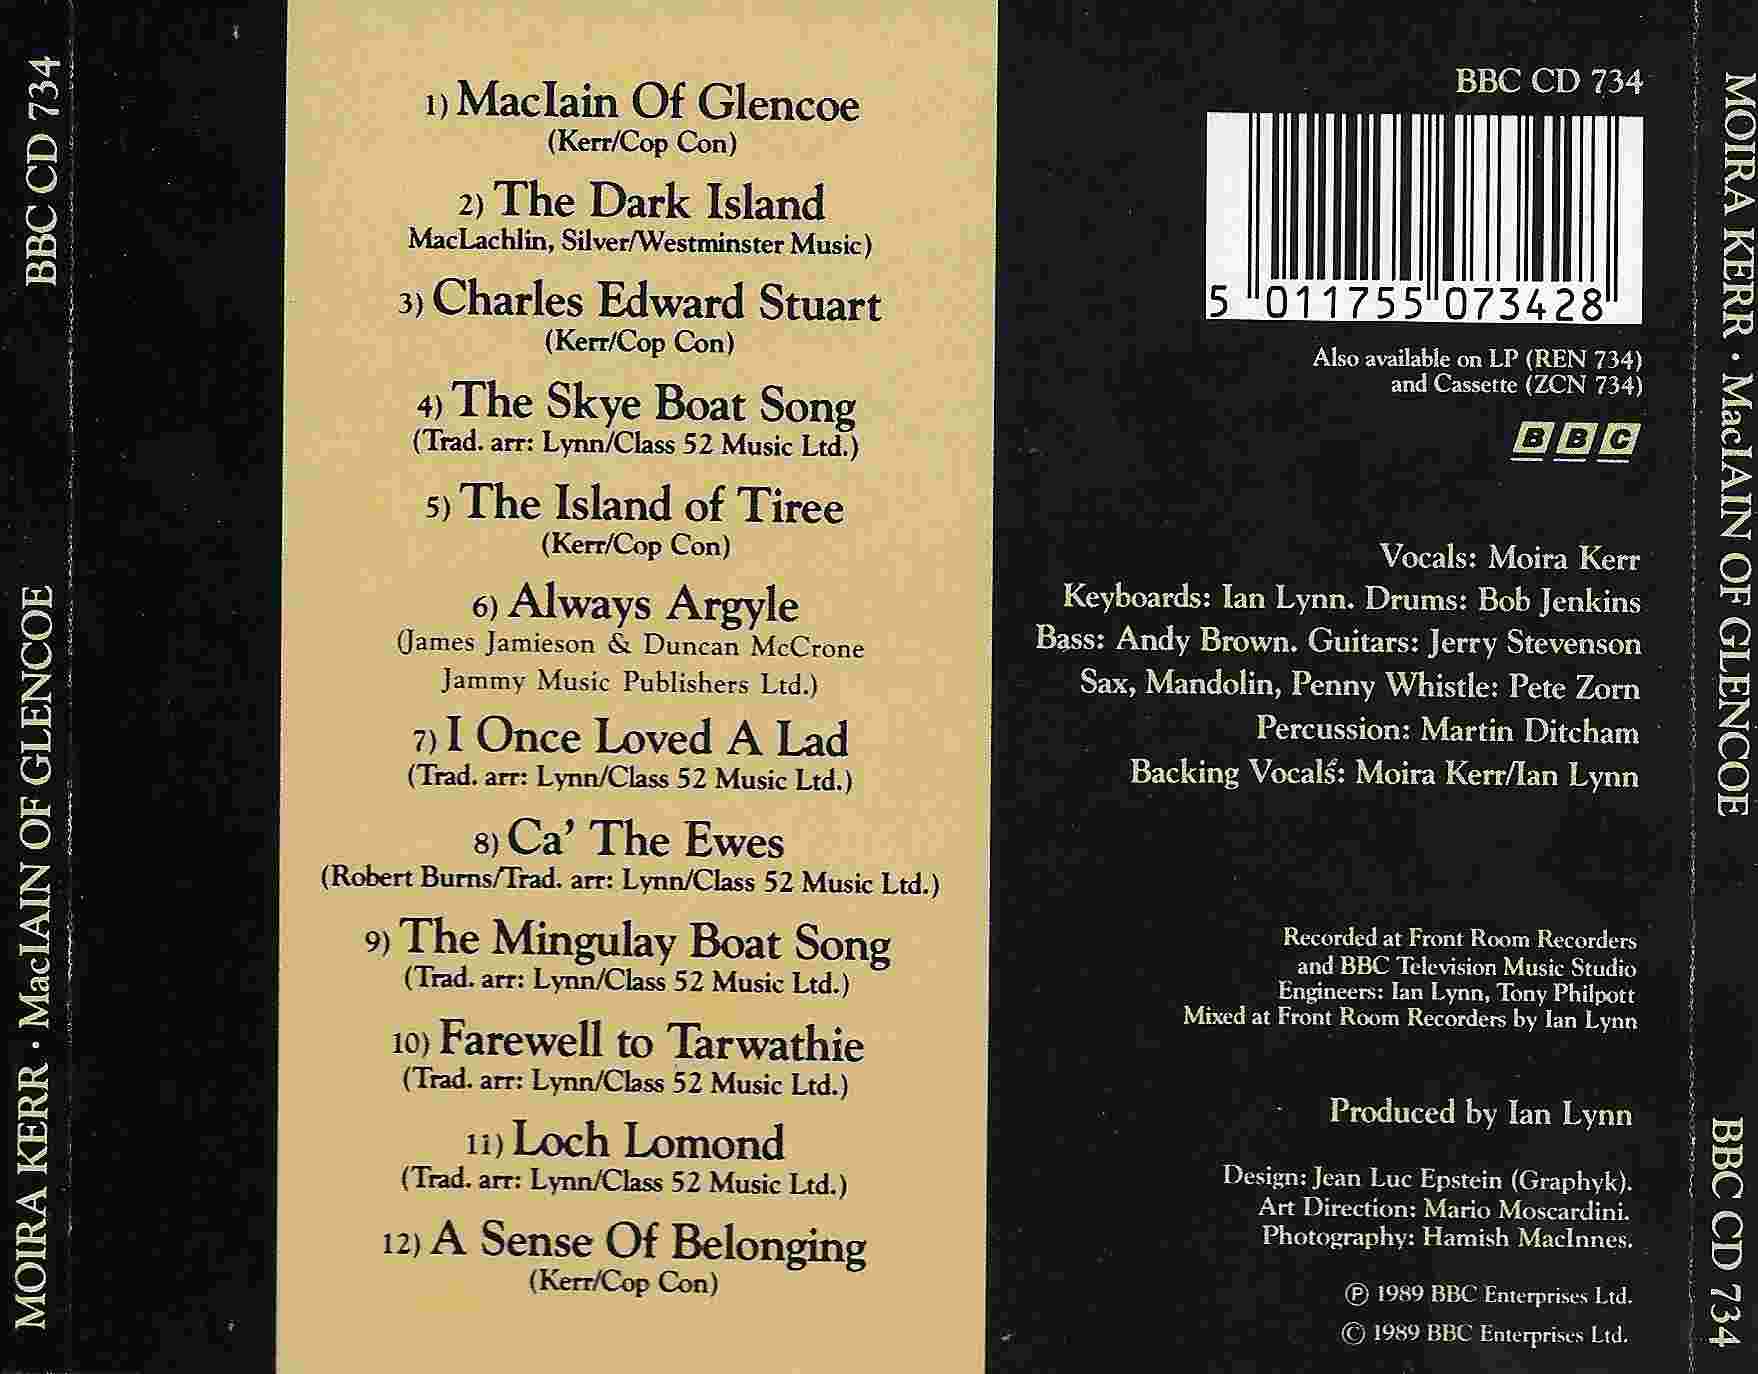 Back cover of BBCCD734